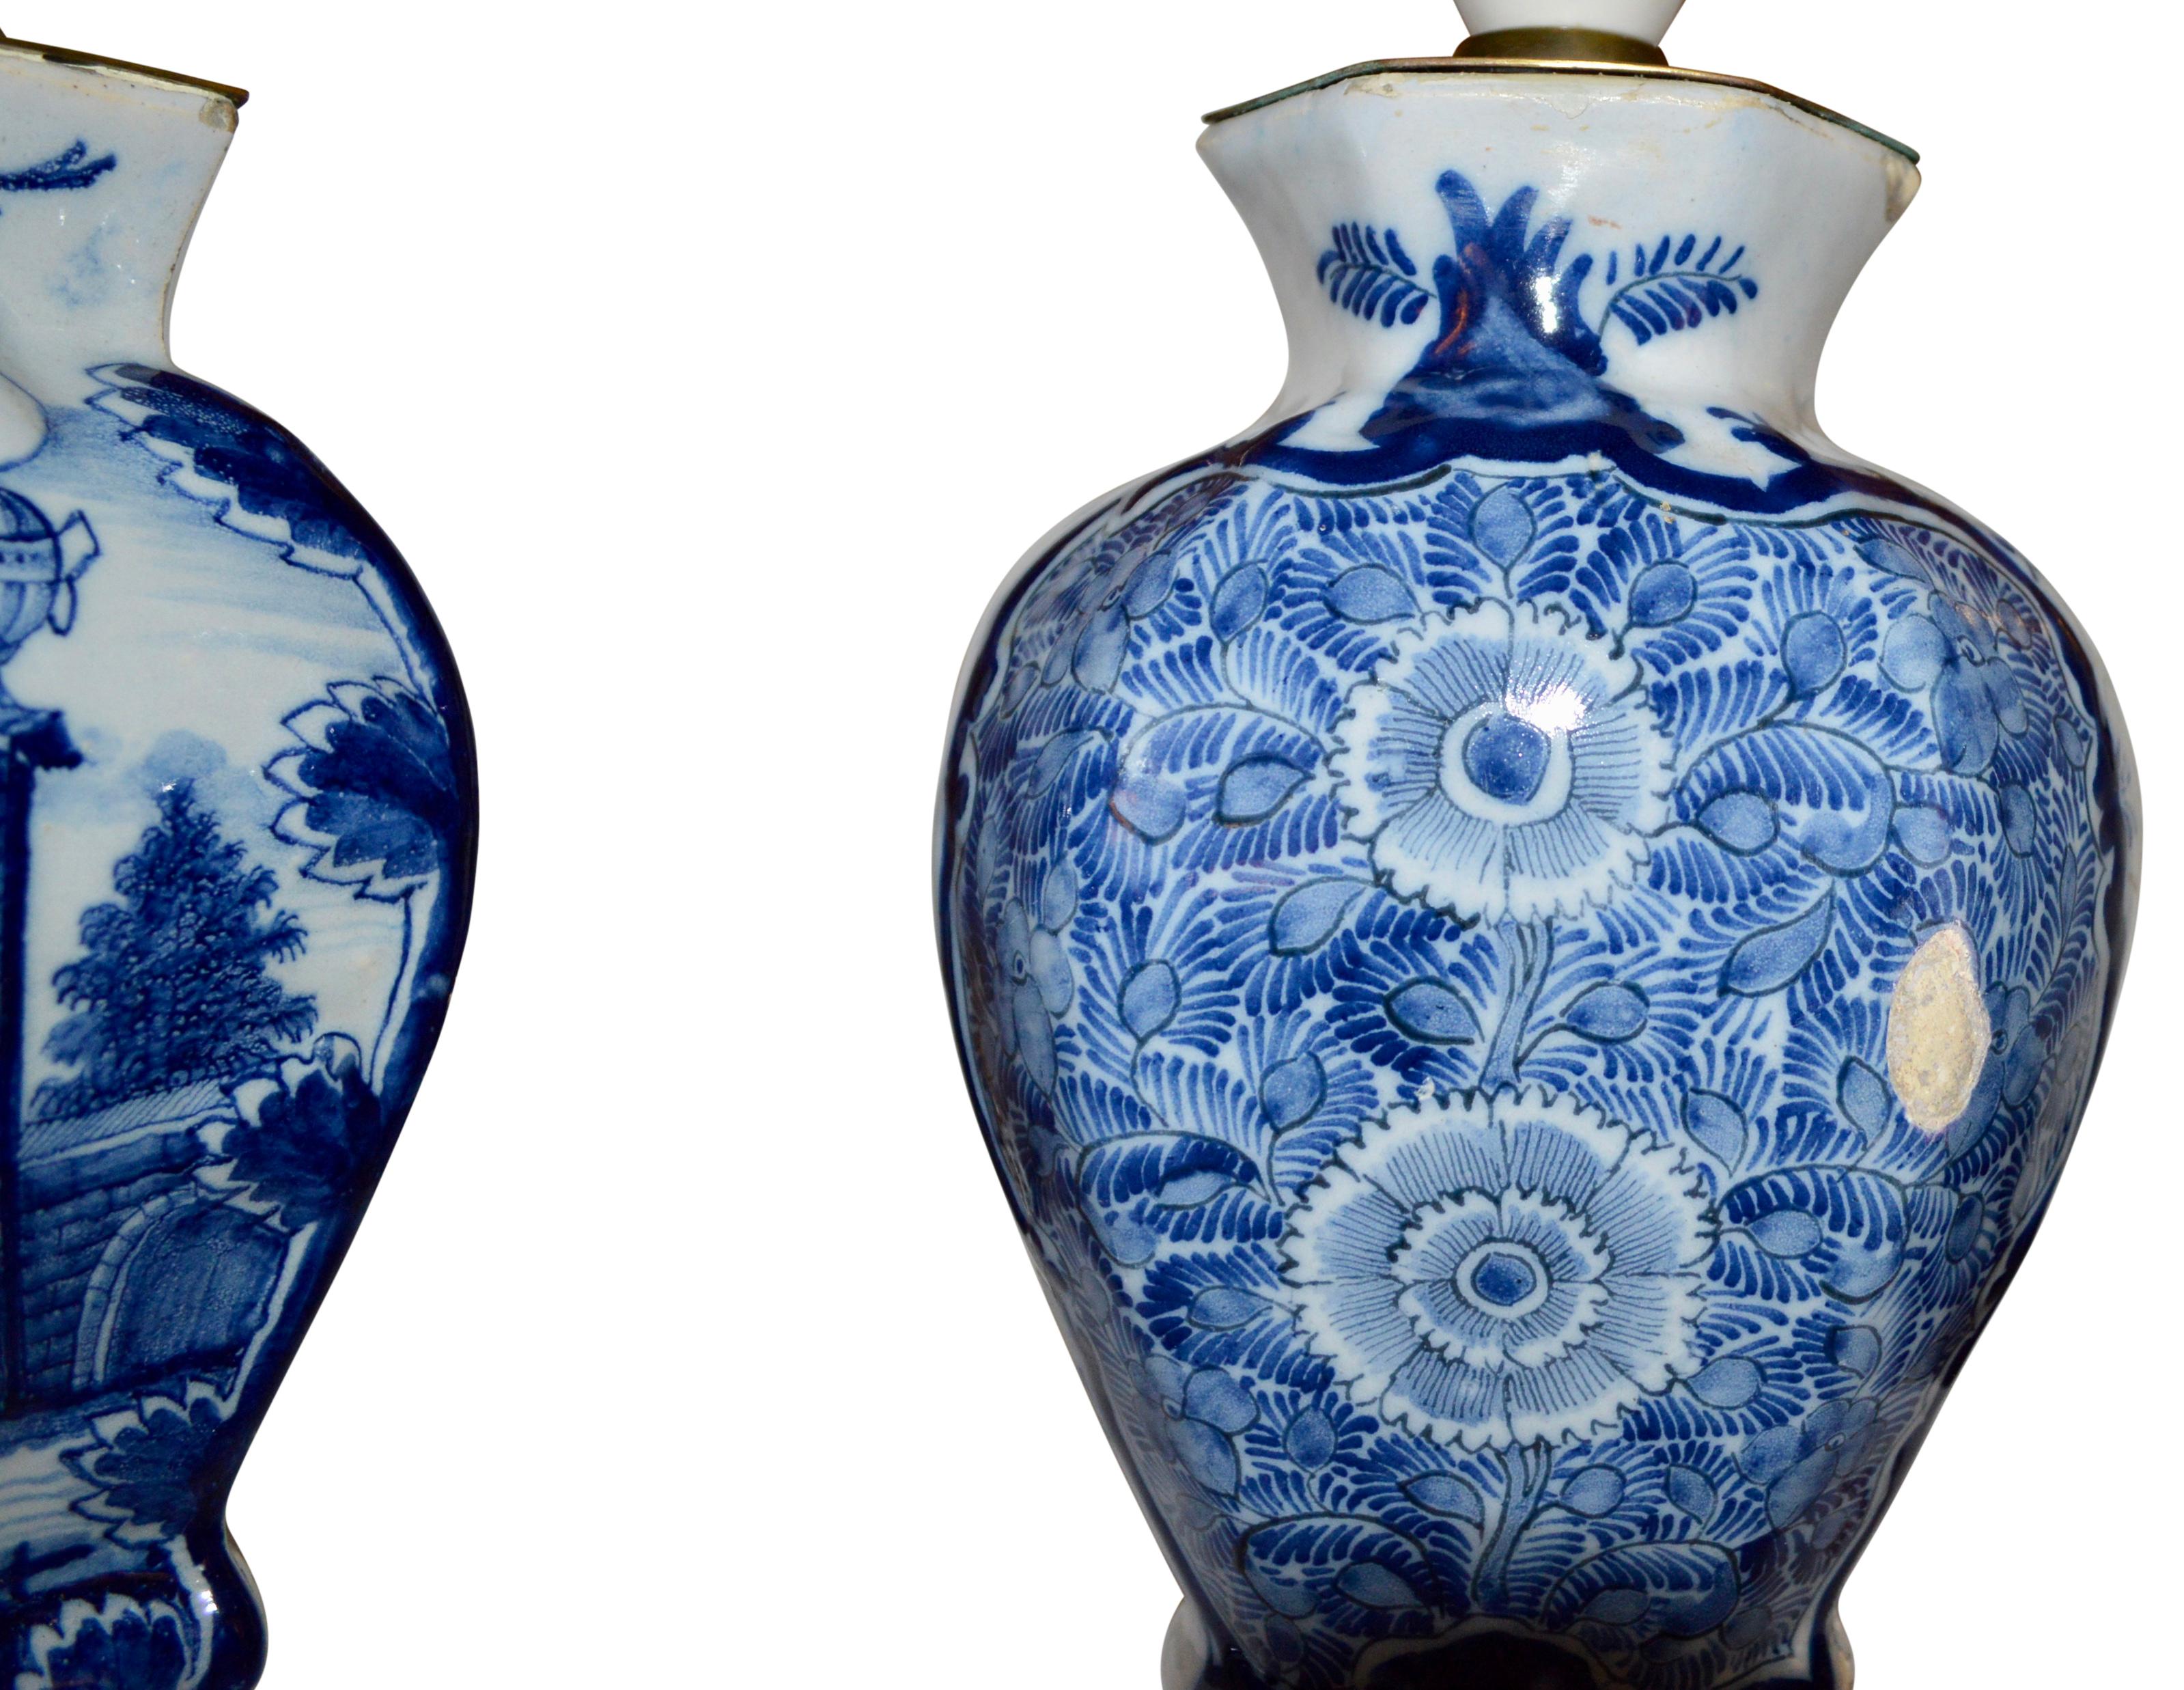 Pair Of 18th Century Blue And White Delft Table Lamps (Niederländisch)